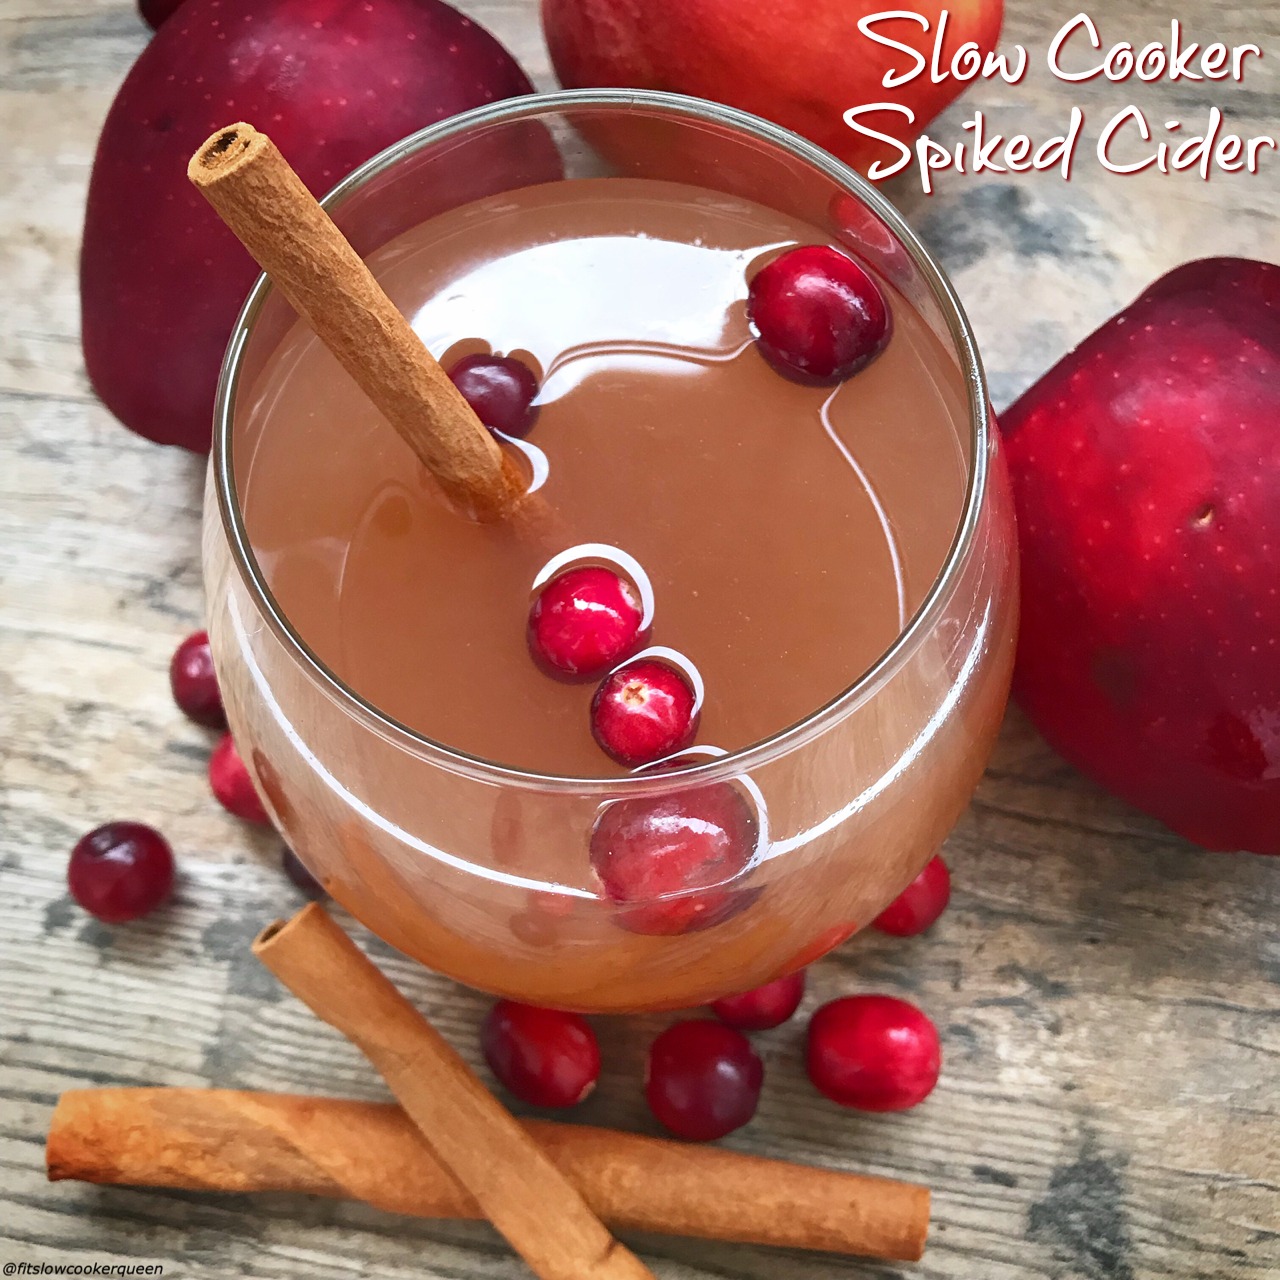 Holiday season means entertaining. This slow cooker spiked cider recipe using all-natural fruit will have your house smelling amazing while adding a nice 'spike' to your punch.